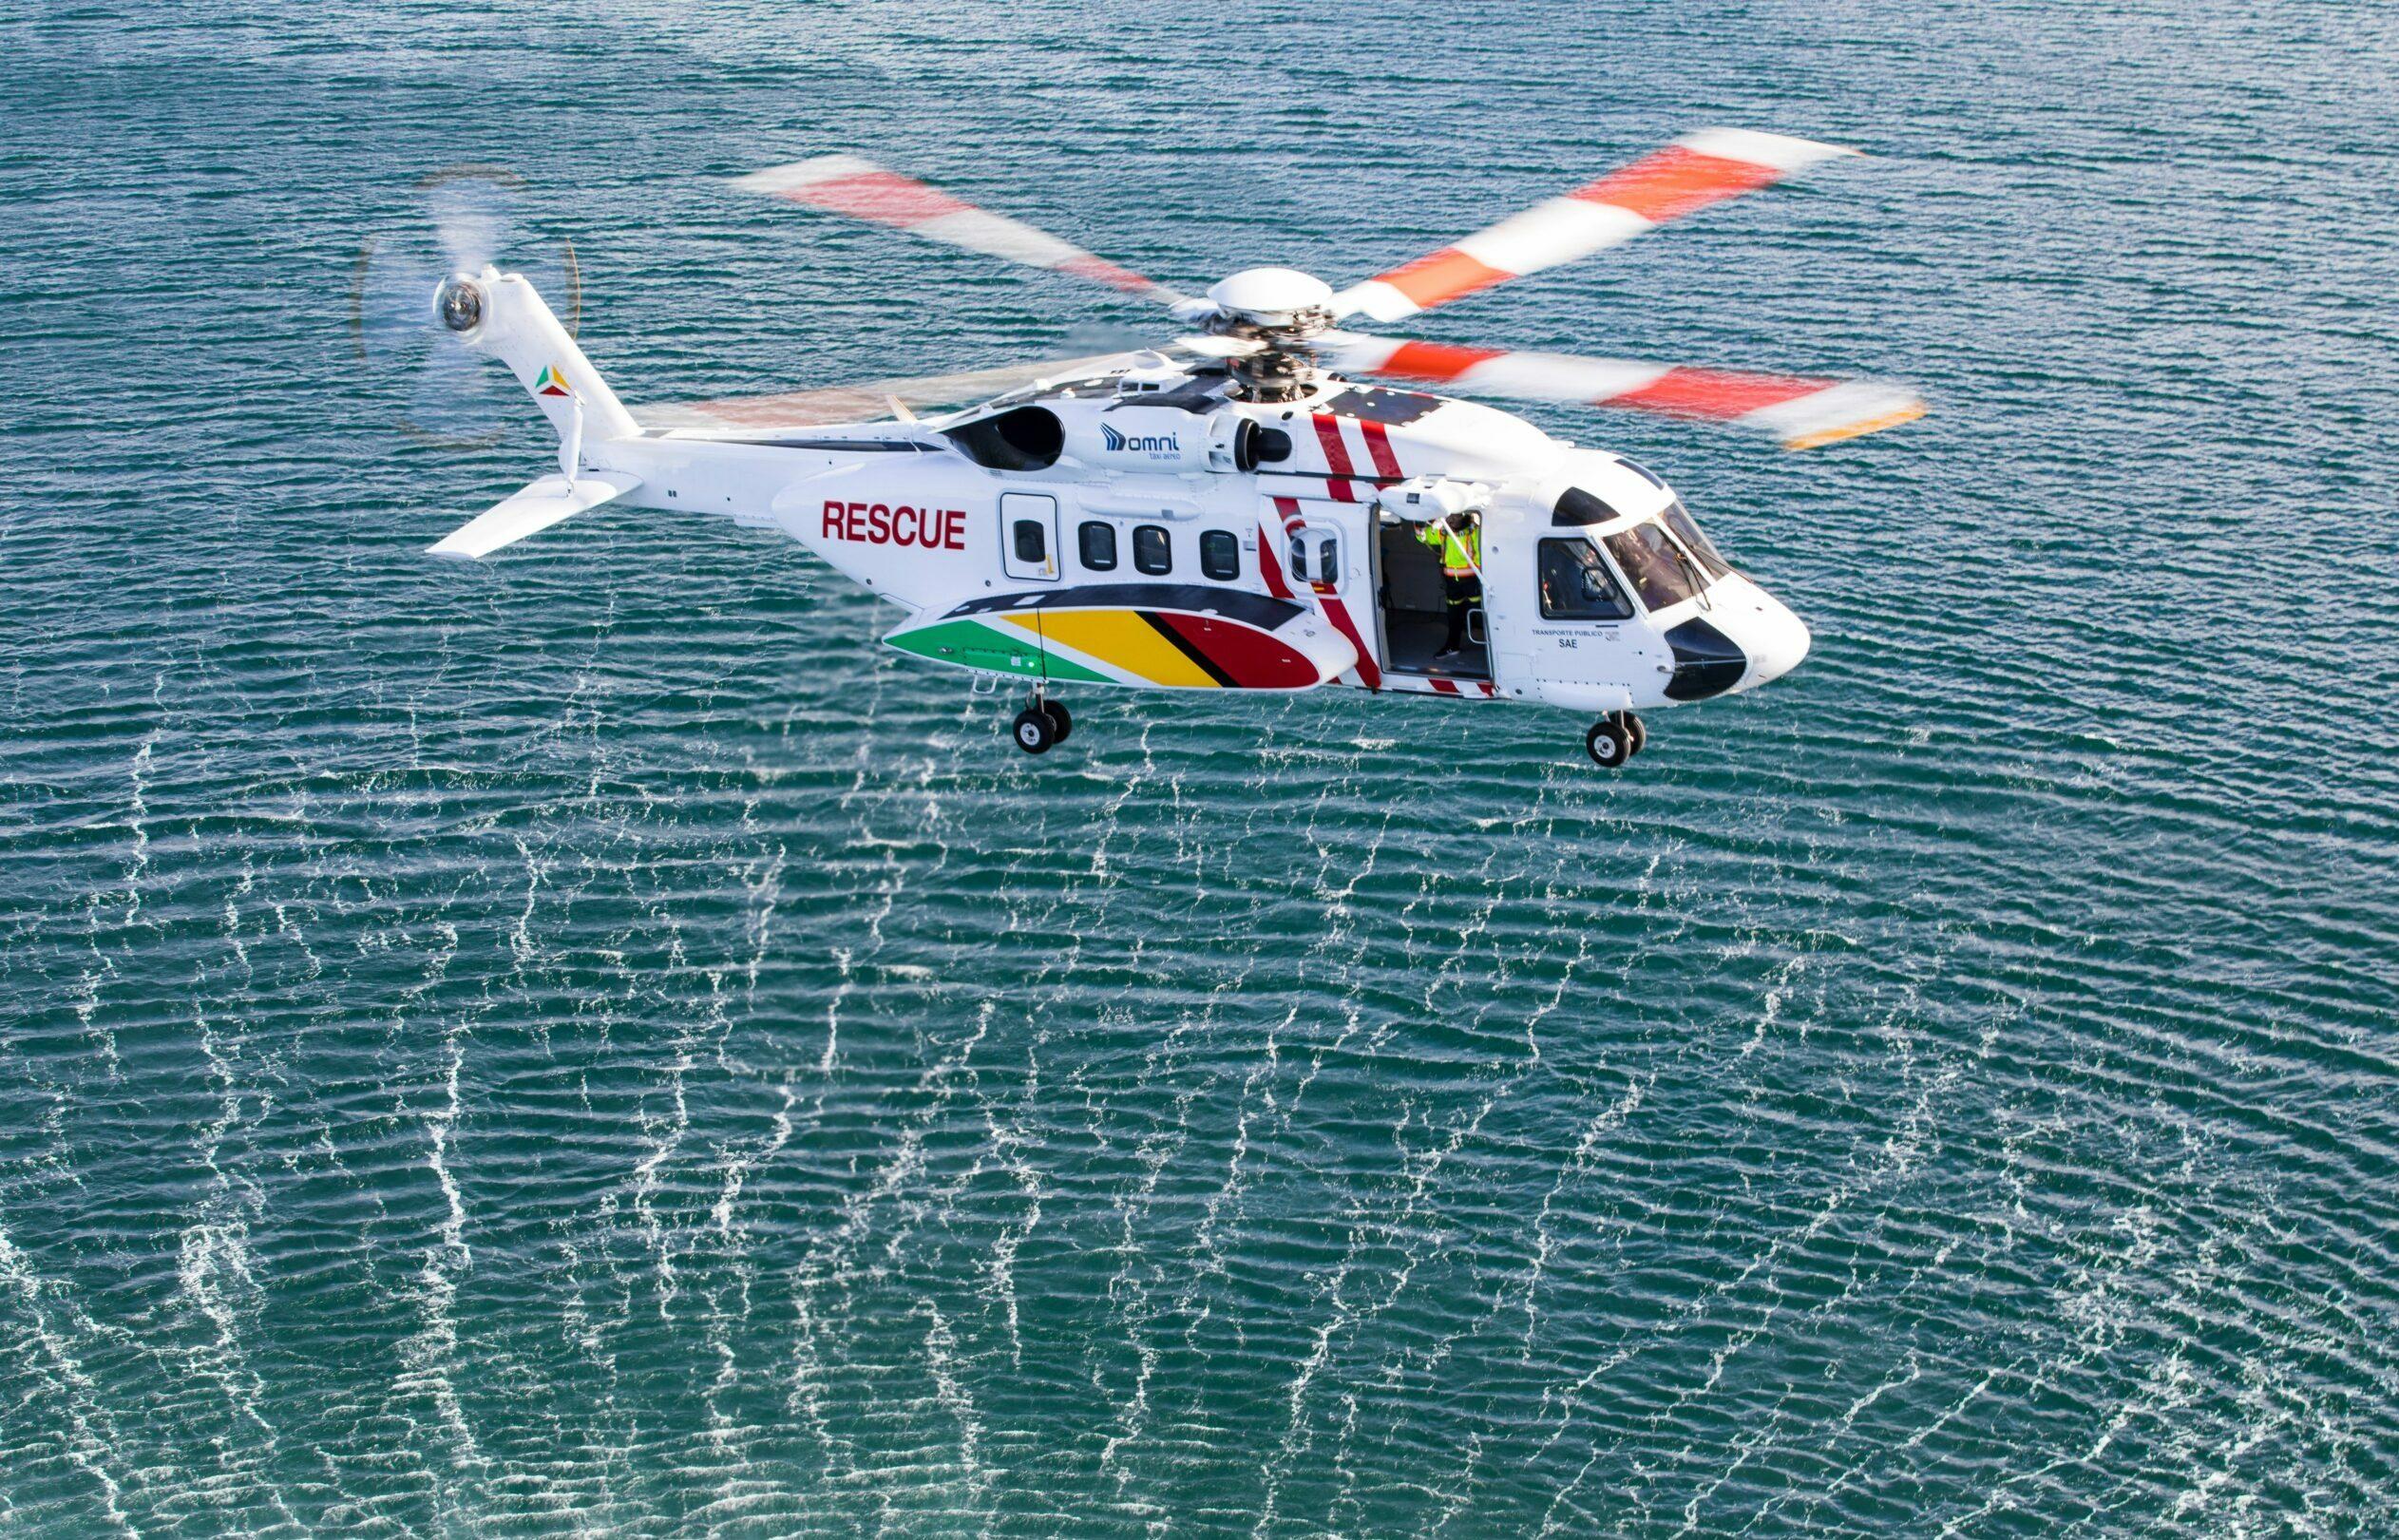 image of an omni helicopter over water